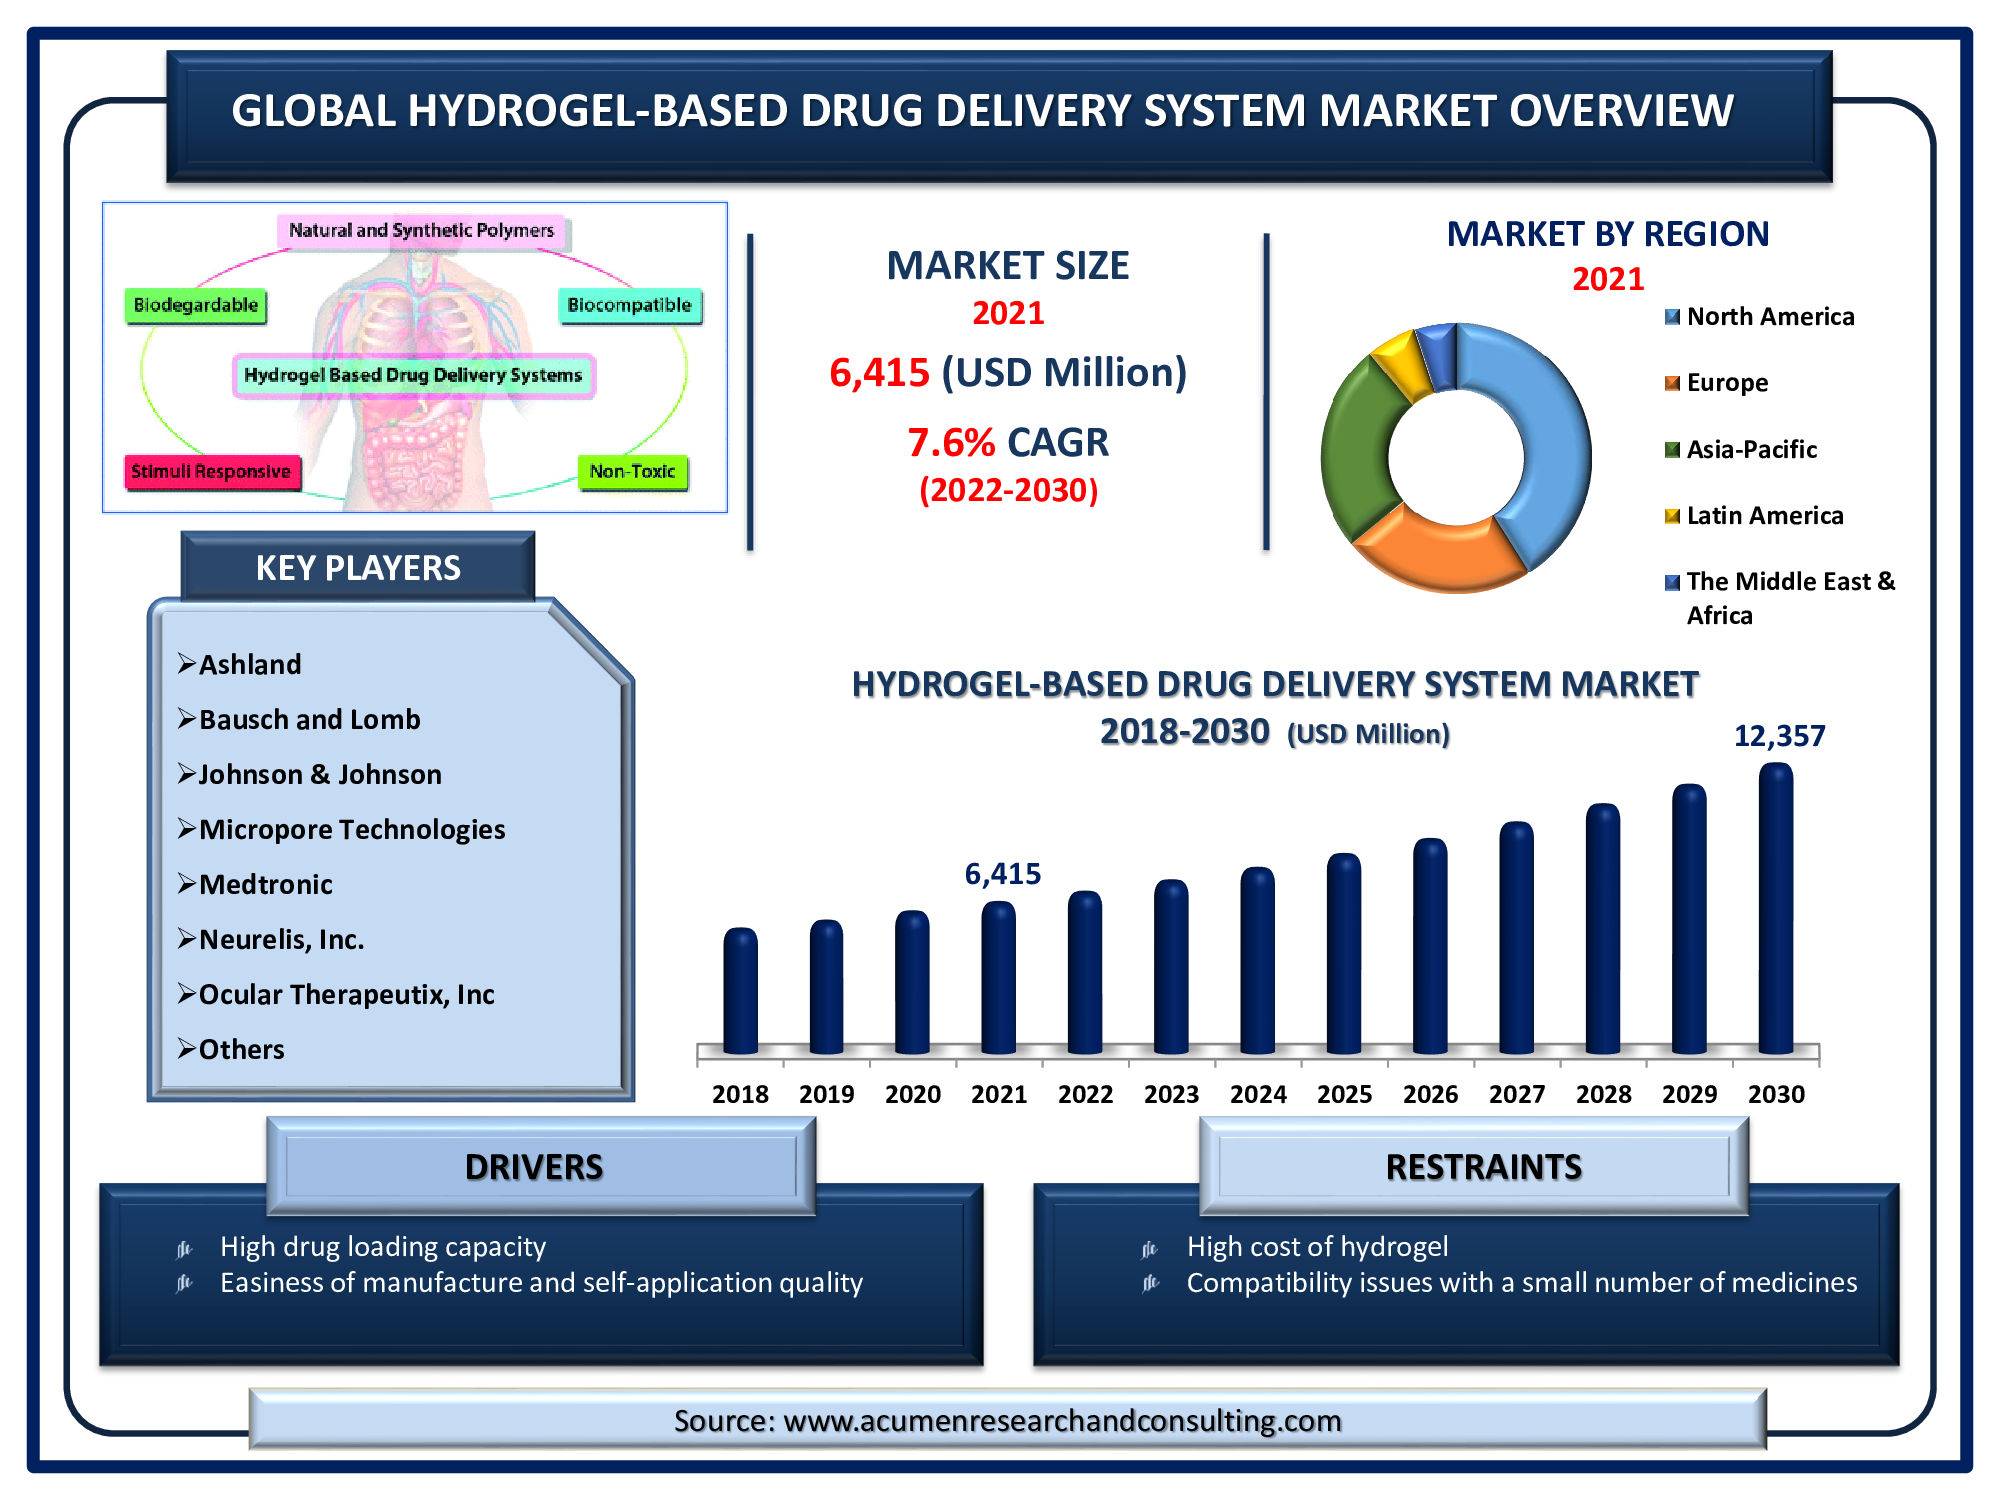 Hydrogel-Based Drug Delivery System Market is estimated to reach USD 12,357 Mn by 2030, with a CAGR of 7.6%